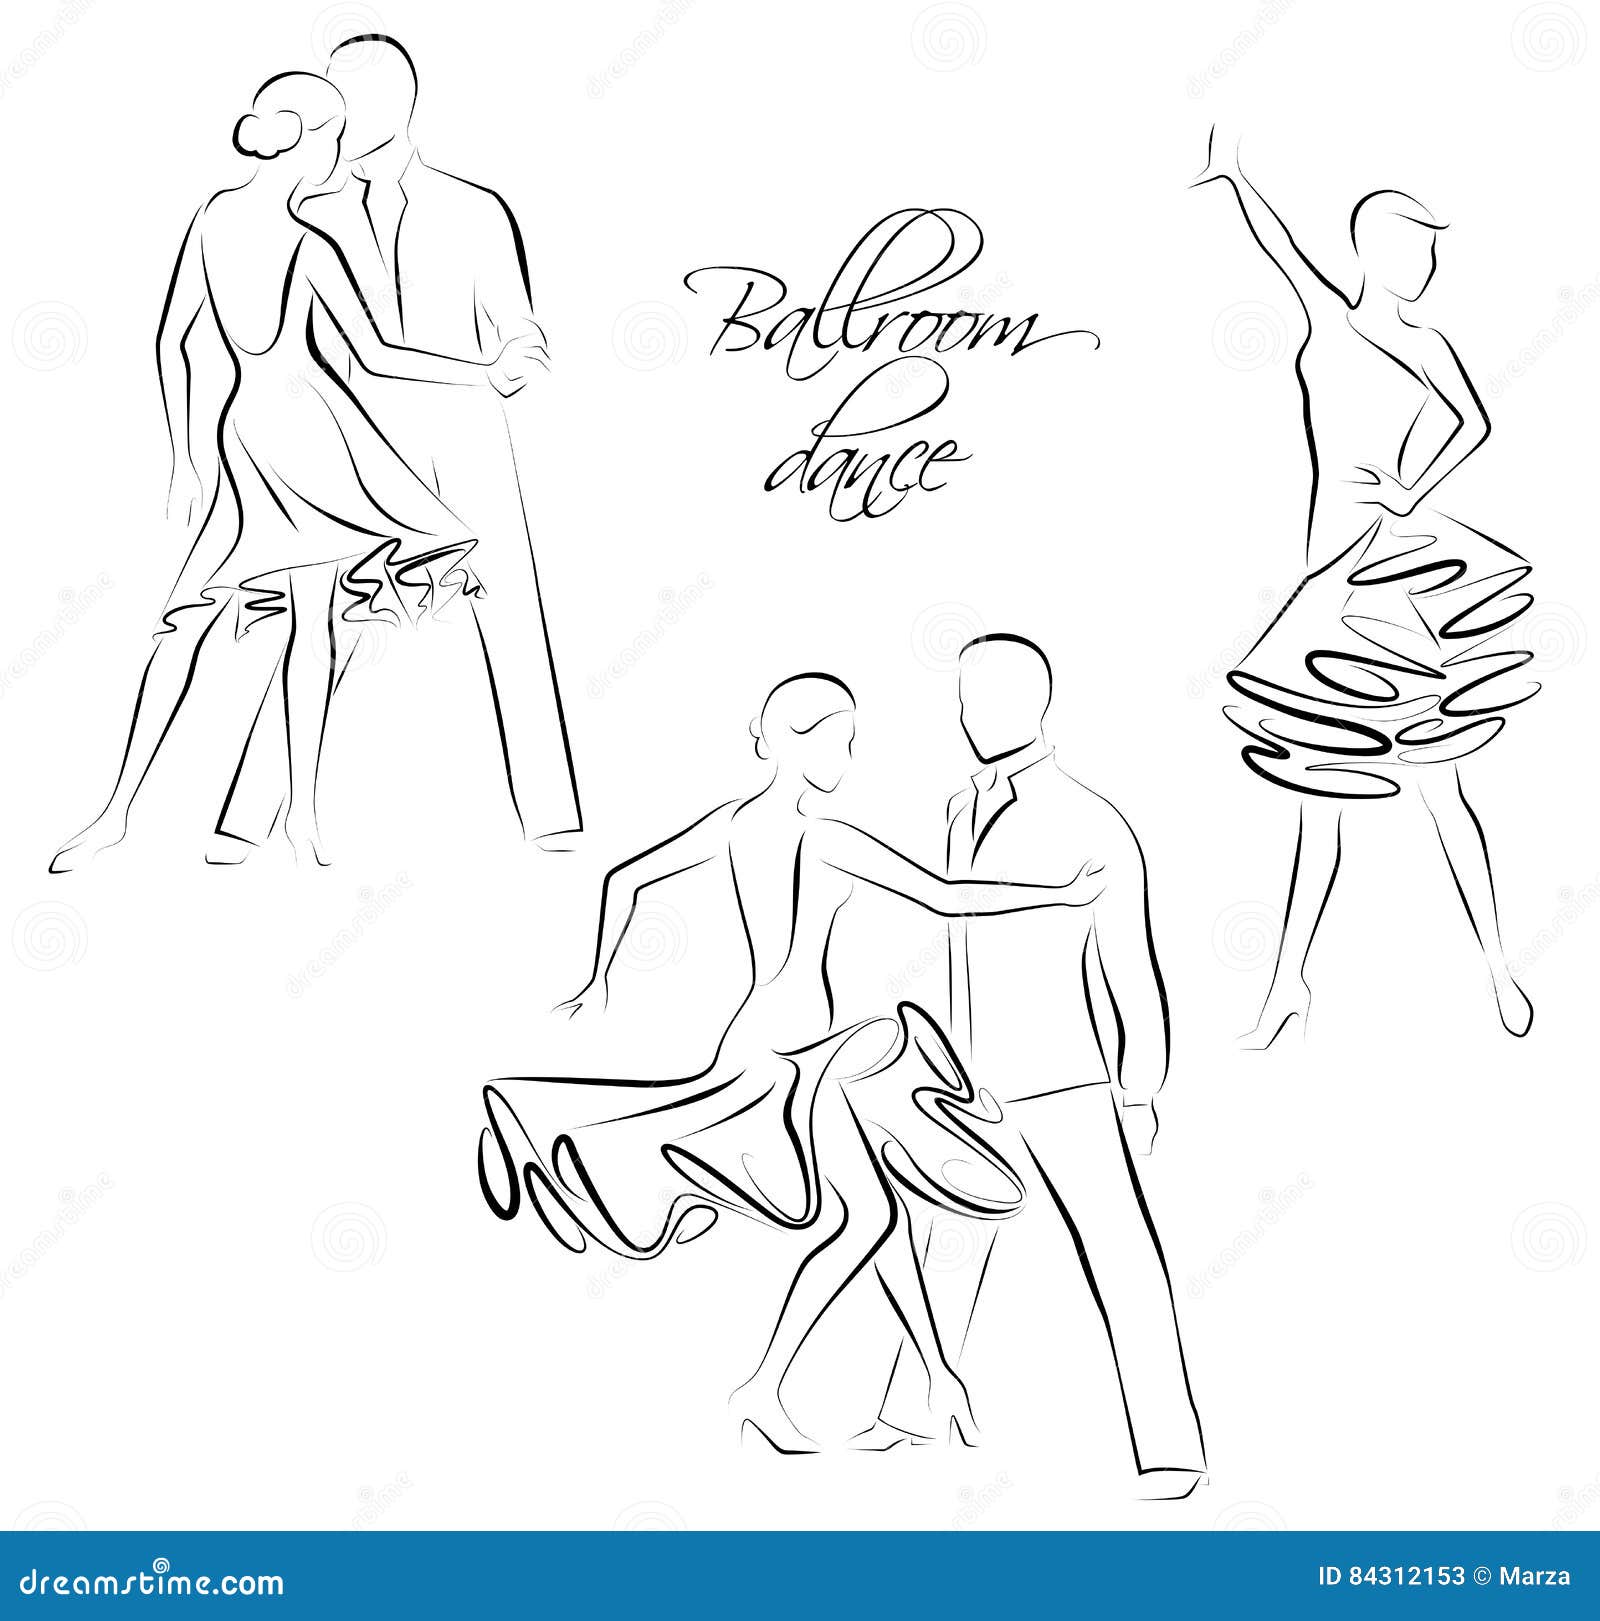 Pin by archive Home on figure drawing | Dancing drawings, Drawing poses,  Art poses